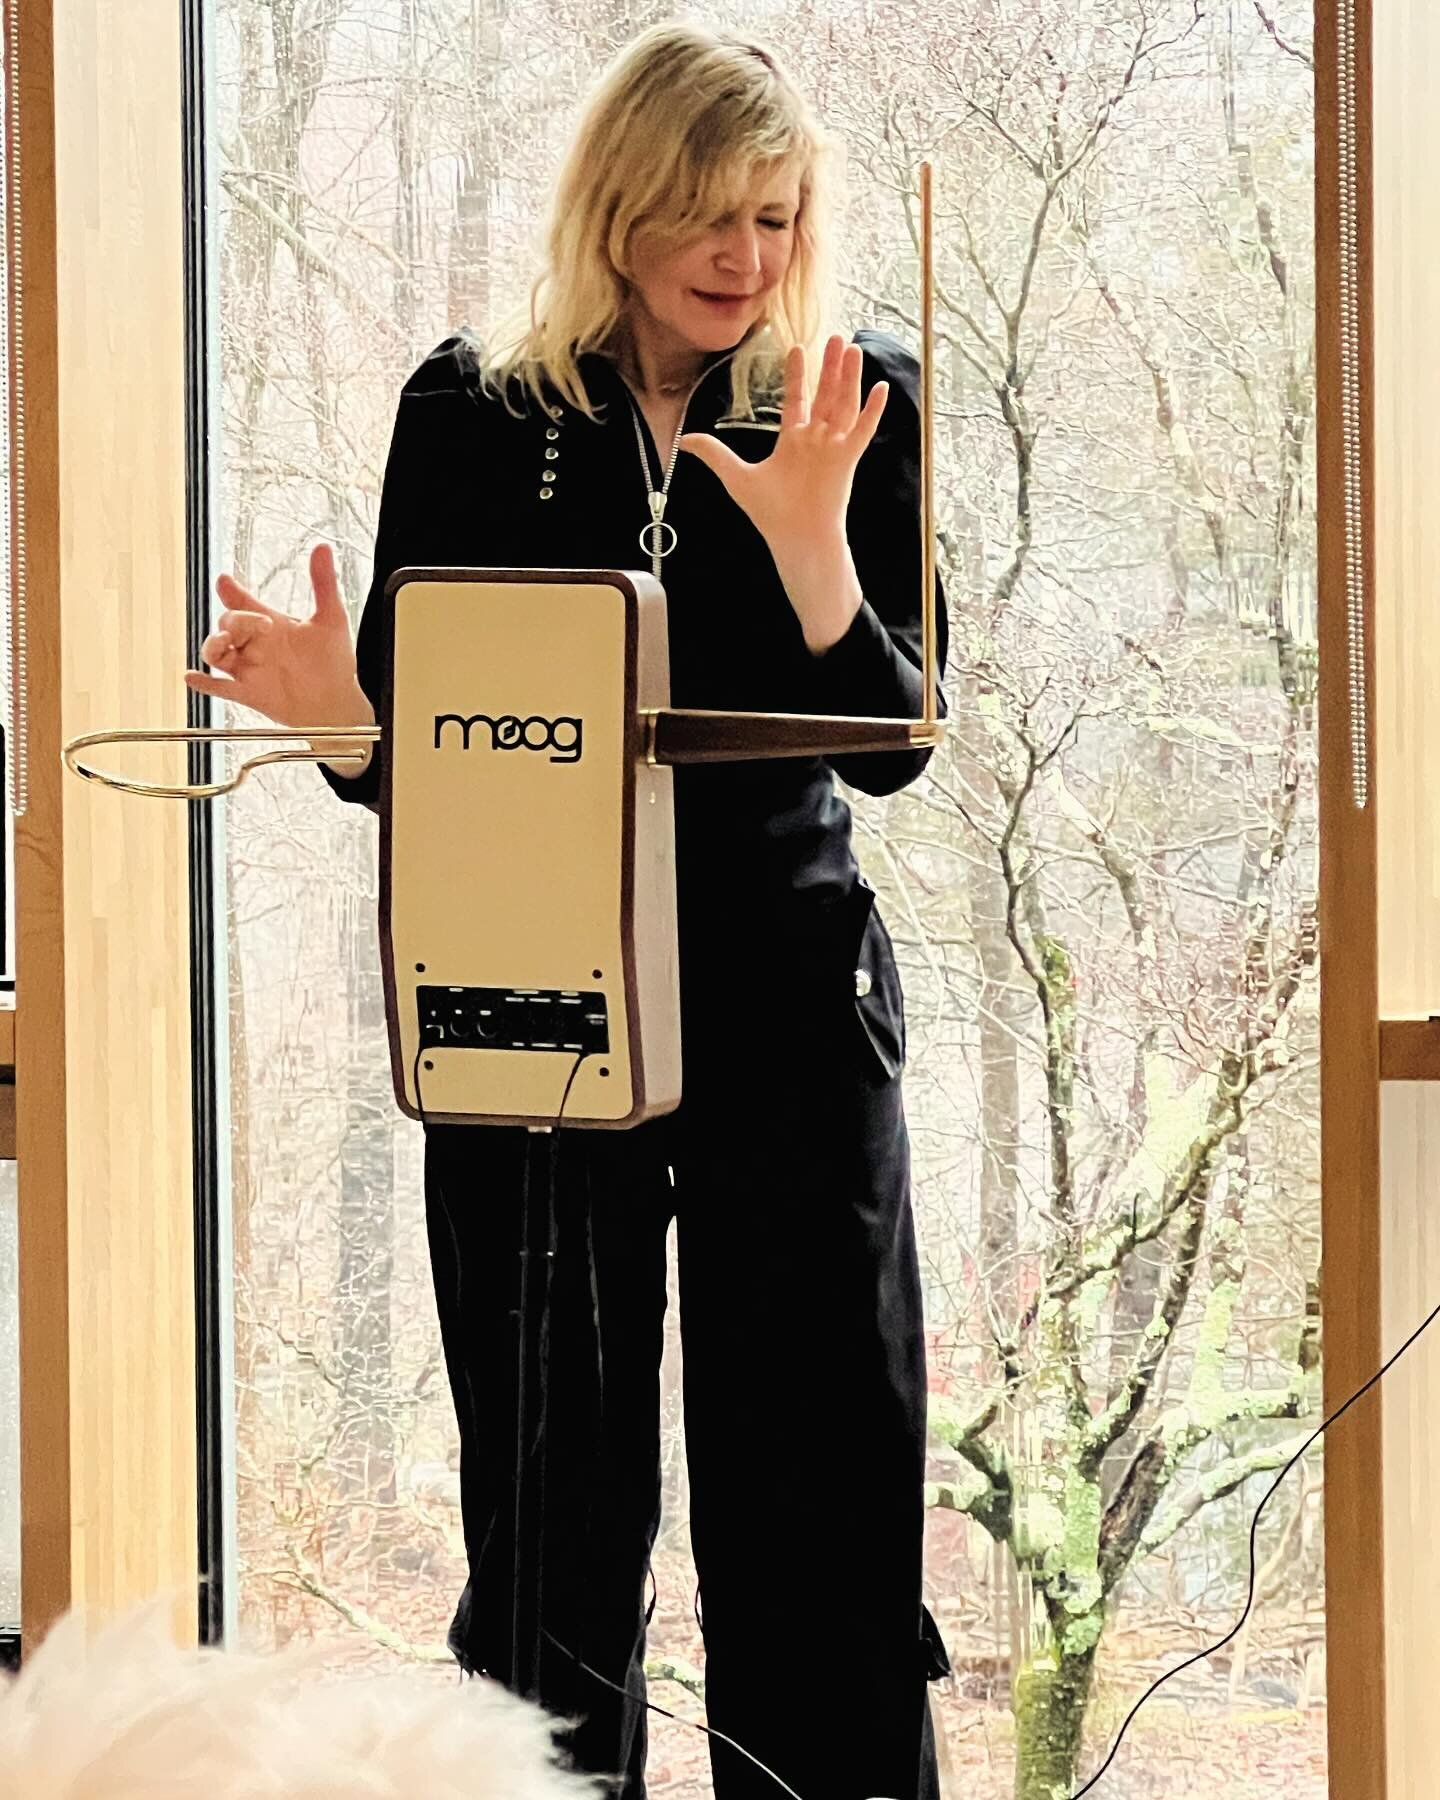 What an extraordinary day with @doritchrysler  The rains fell hard, providing a perfect back drop for Dorit&rsquo;s presentation - based on her work at @lostandfoundlab and @caramoor archives.  Thank you intrepid friends for coming out for an indoor 